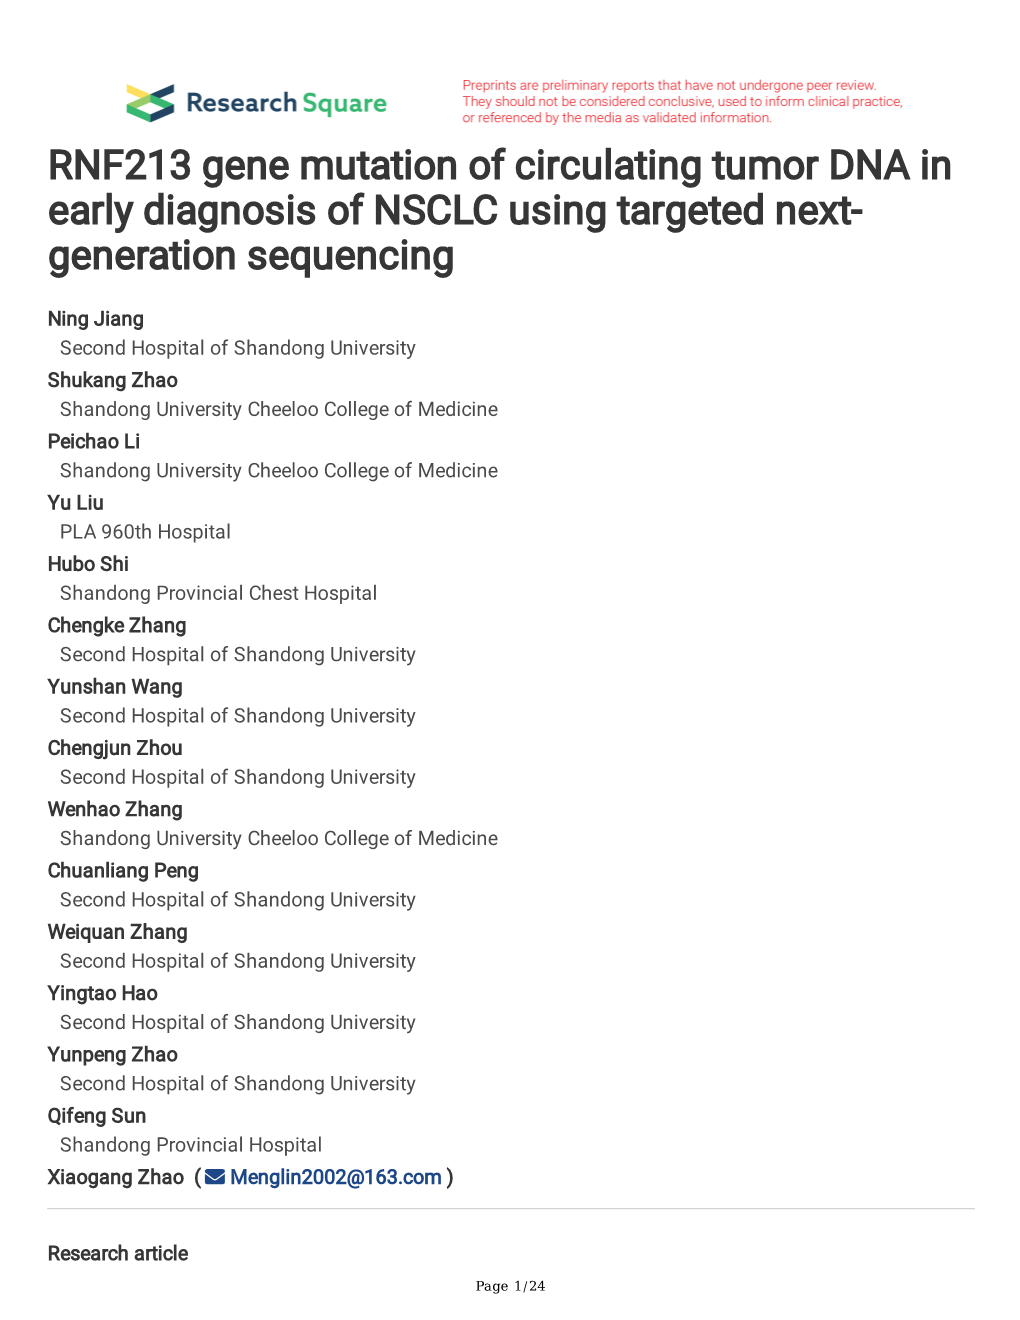 RNF213 Gene Mutation of Circulating Tumor DNA in Early Diagnosis of NSCLC Using Targeted Next- Generation Sequencing